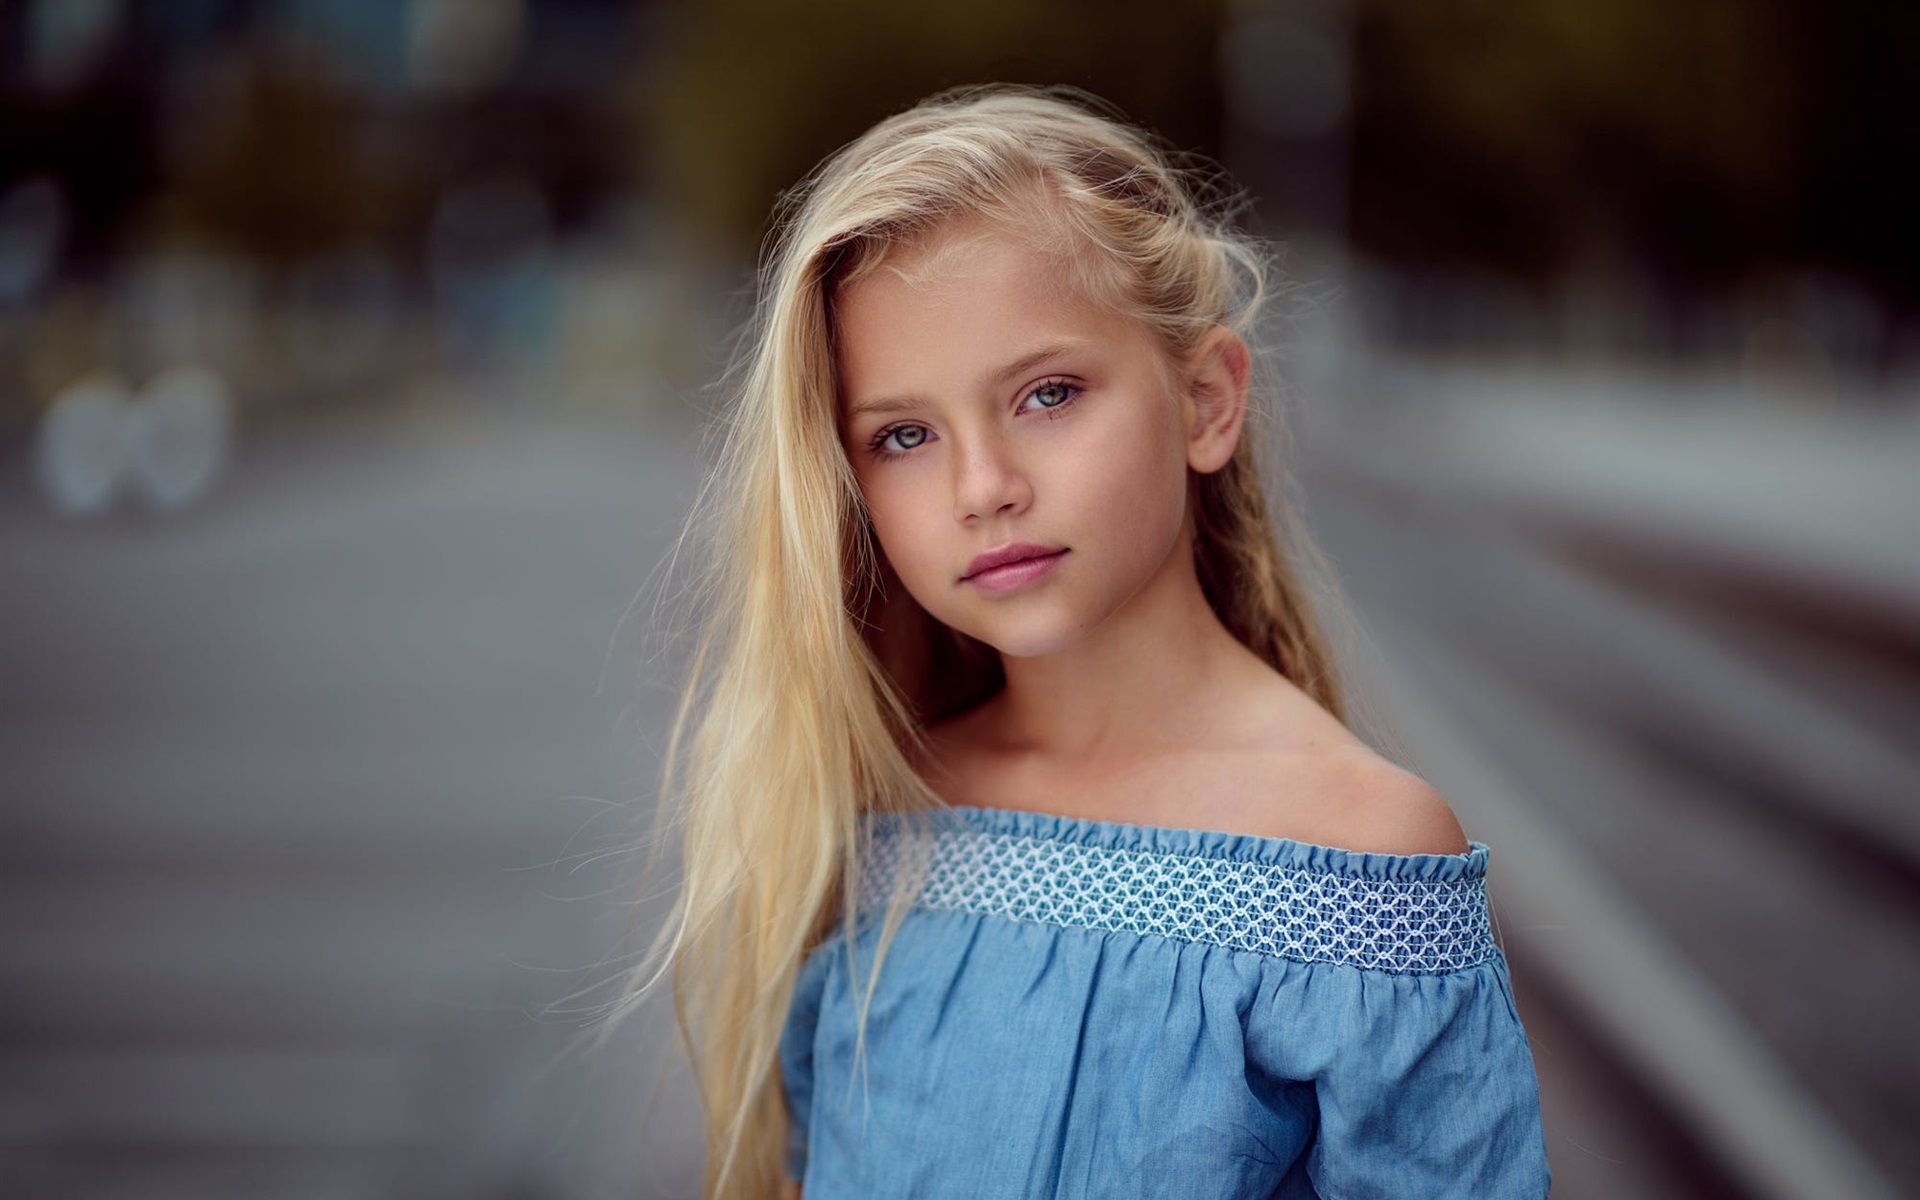 Wallpaper Cute child girl, blonde, blue skirt 1920x1200 HD Picture, Image